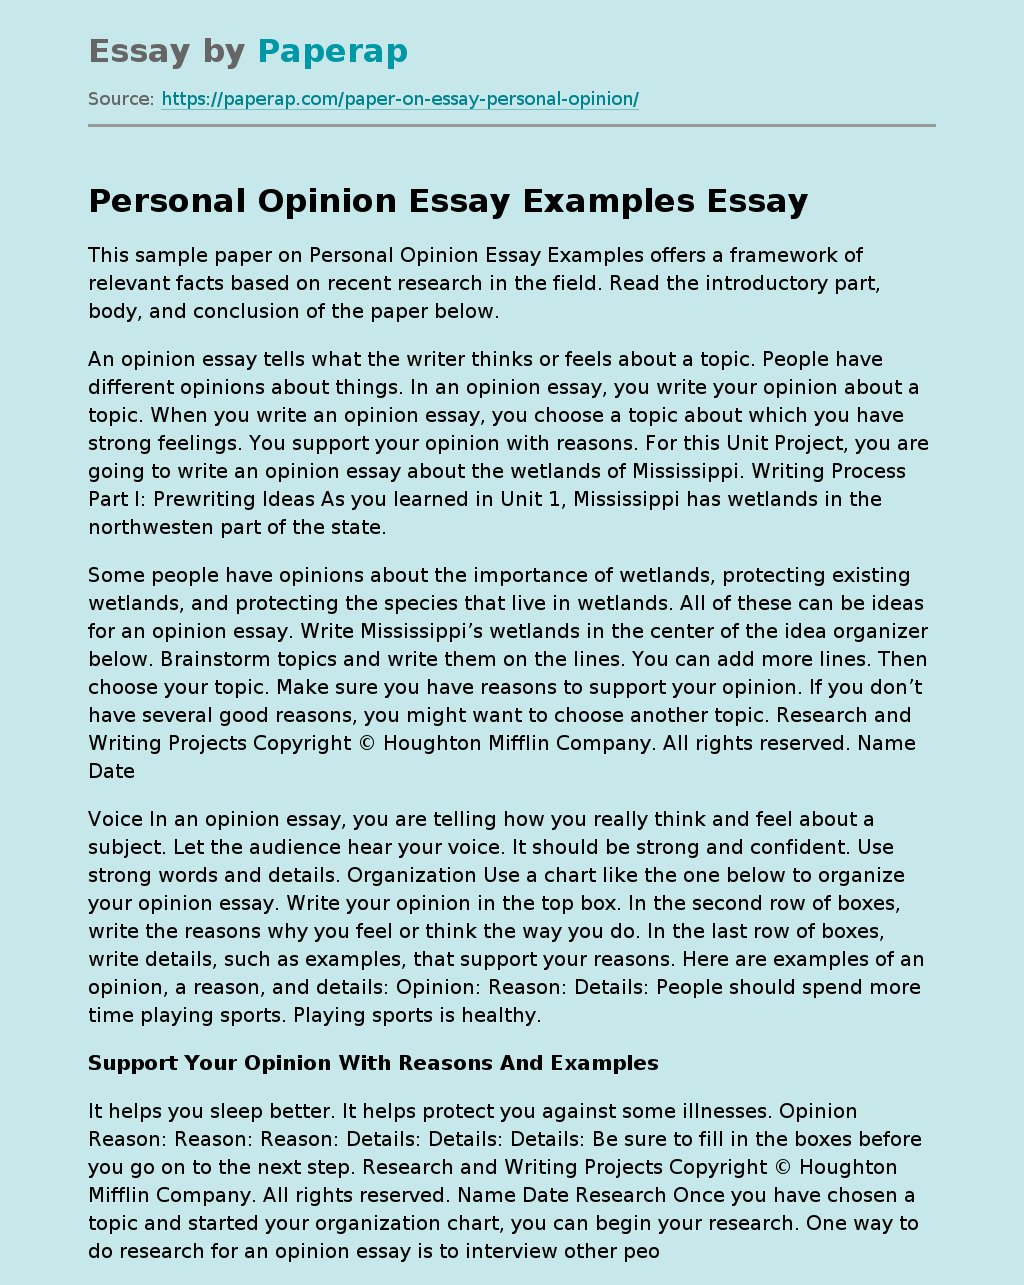 Personal Opinion Essay Examples